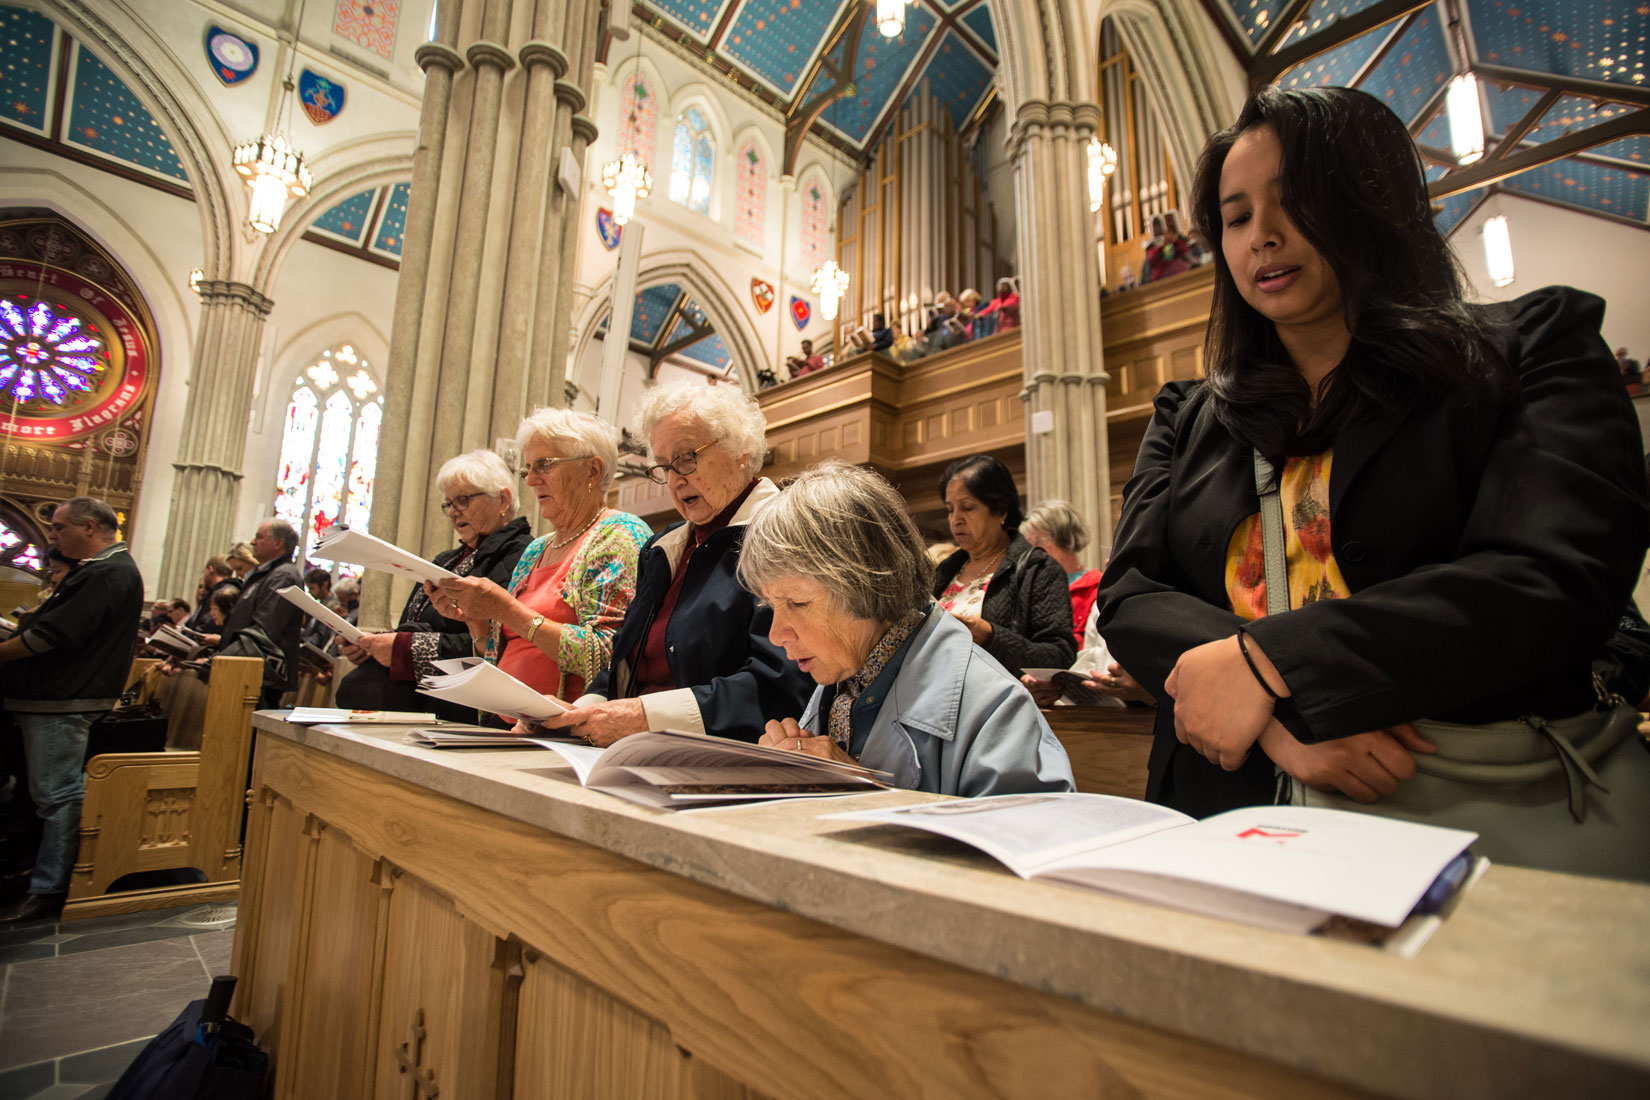 Women praying at the workers’ thanksgiving Mass at St. Michael’s Cathedral Sept. 30. (Photo by Michael Swan)